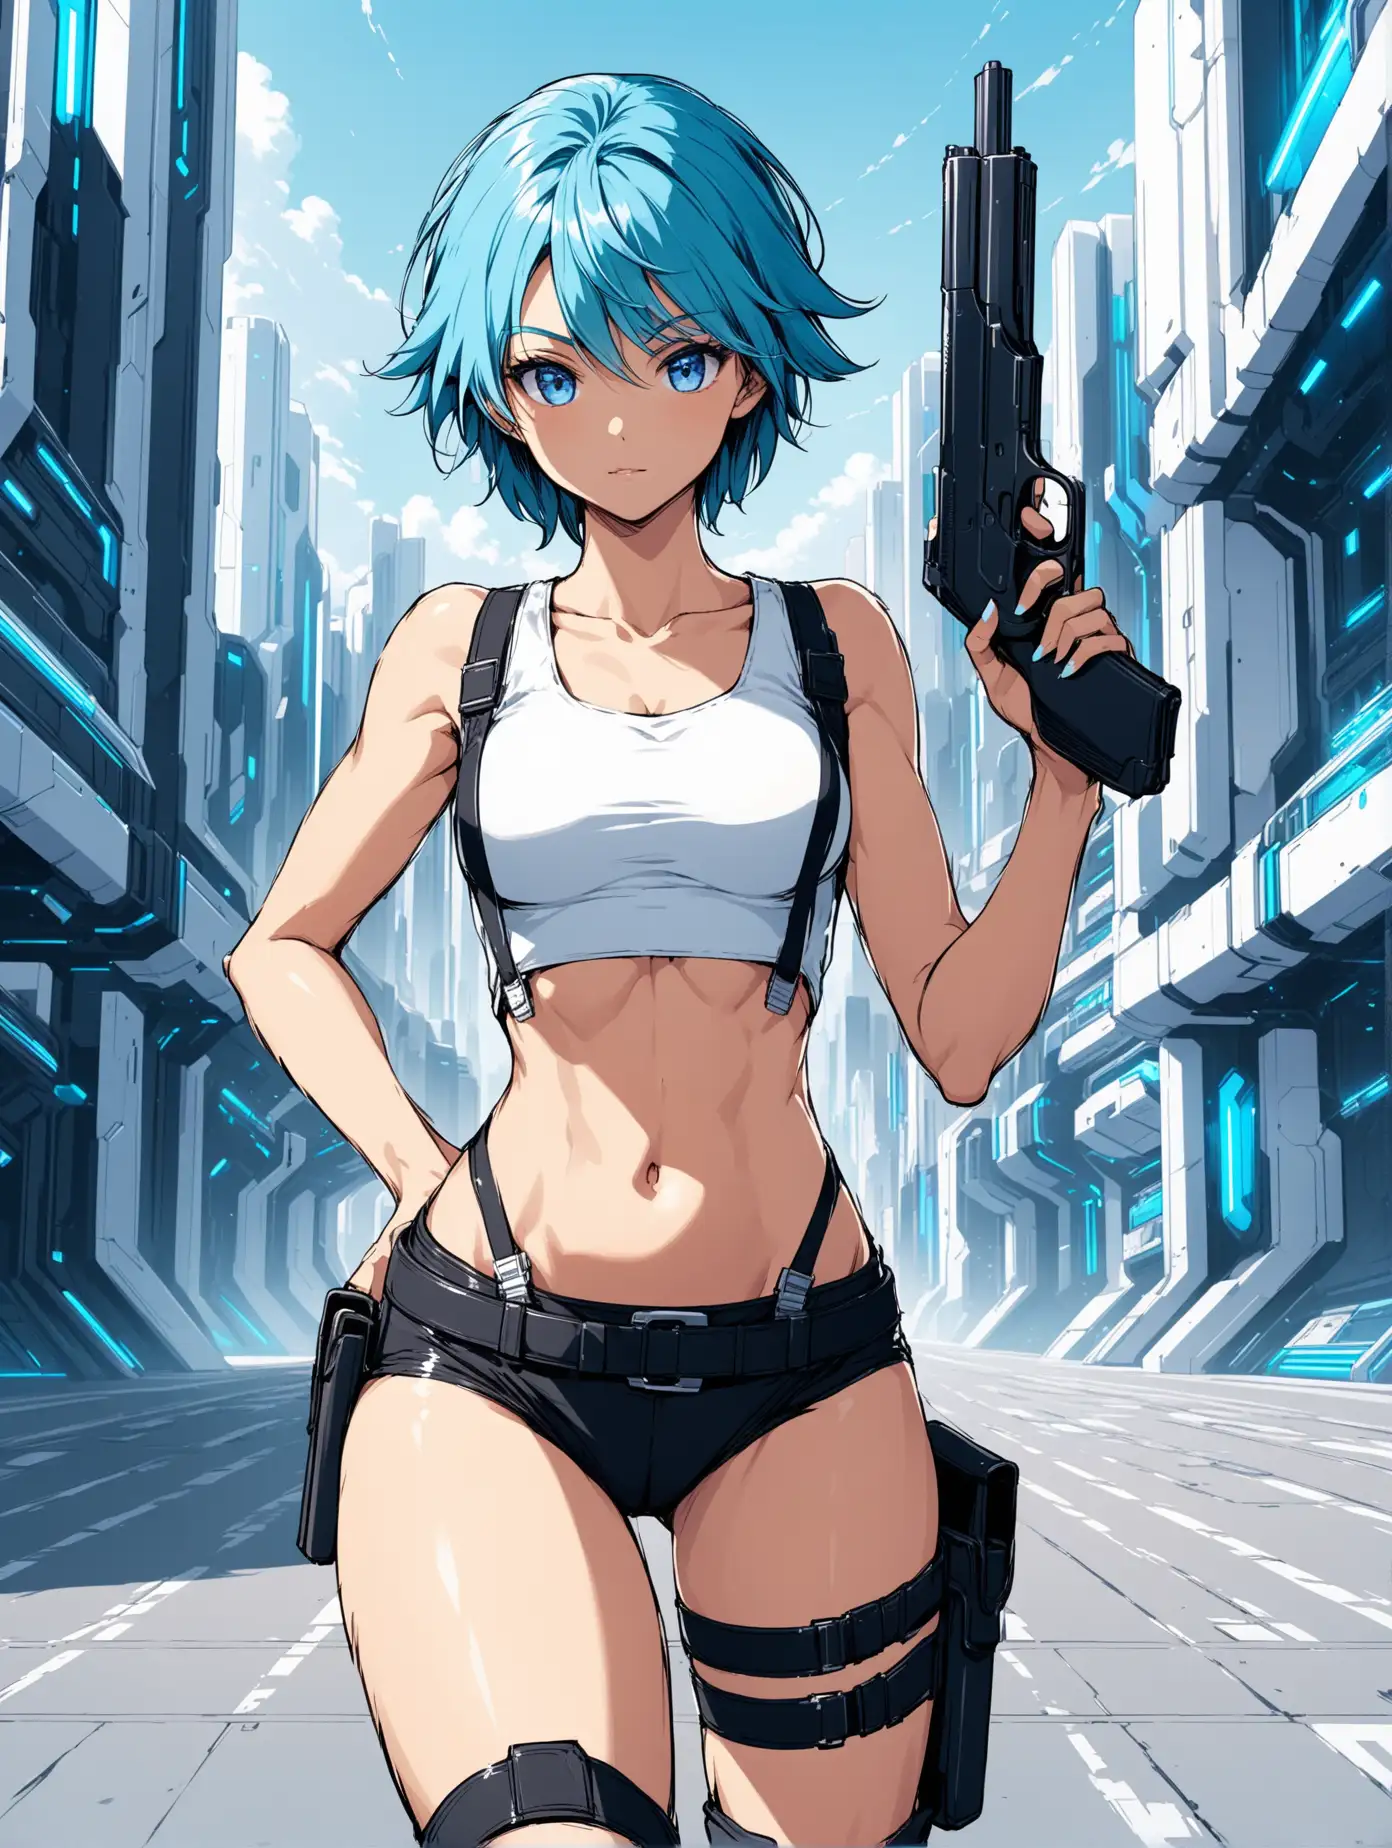 Futuristic Heroine with Blue Hair Poses in Urban Landscape with Handguns